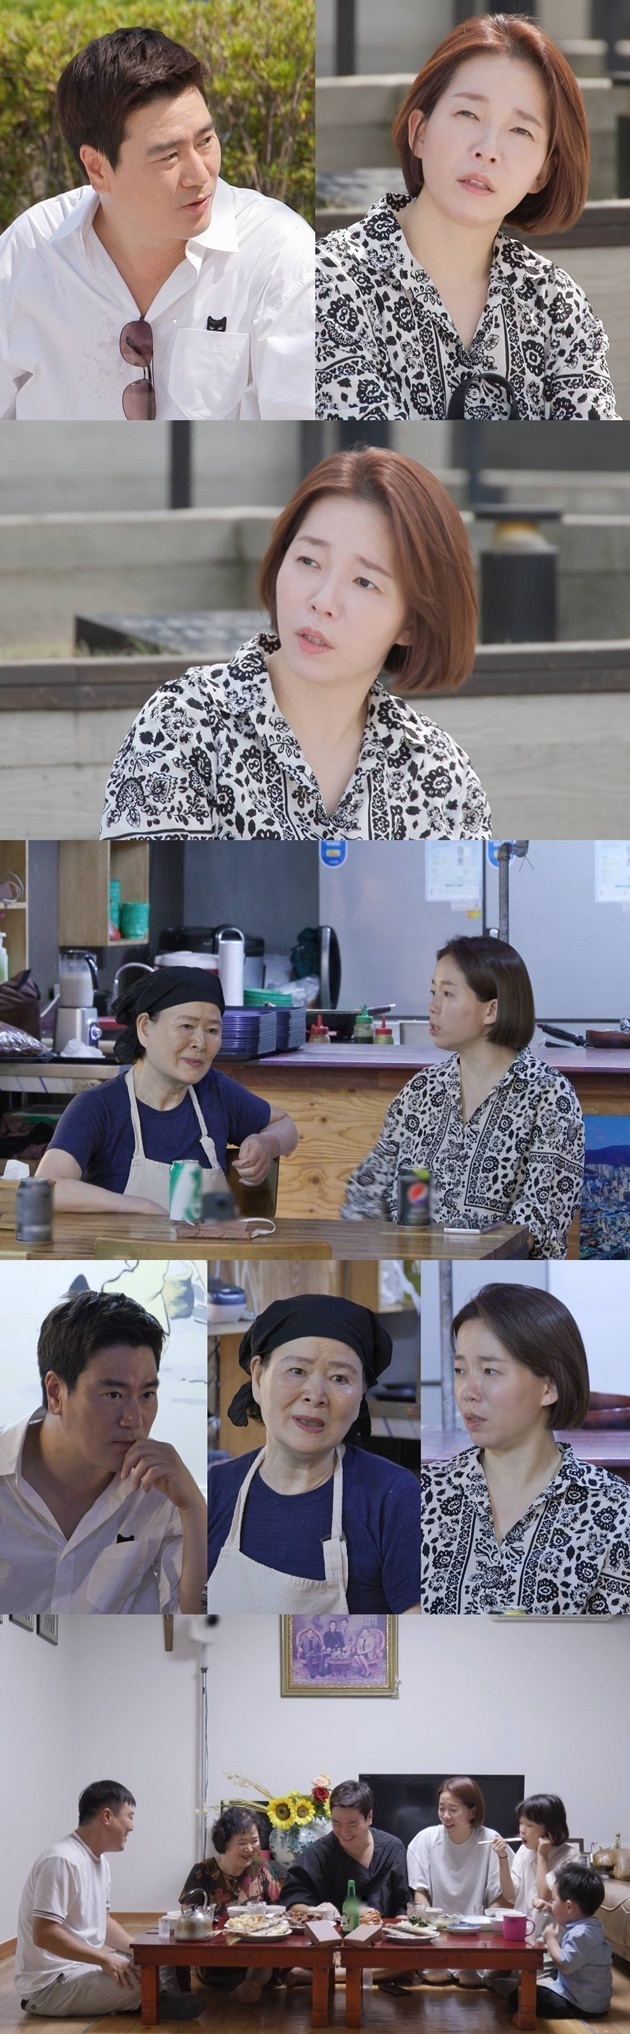 Jung Yi-rang has a close talk with the mother-in-law.On October 23, SBS Same Bed, Different Dreams 2 Season 2  ⁇  You are my destiny  ⁇  (Same Bed, Different Dreams 2  ⁇ ) depicts Jung Yi-rang family visiting Busan Laws. ⁇  CooktopCouple ⁇  Jung Yi-rang, Kim Hyung-geun Couple caught an unusual airflow.Jung Yi-rang, who arrived at Busan Station for a visit to Laws, complained to Kim Hyung-geun, who made his body and mind uncomfortable, saying, Do not you come comfortably when you come to Laws?Kim Hyung-geun, who listened to them, turned my studios upside down, saying, How good is my mother to you?As soon as I arrived at Busan, I wondered what caused the conflict that caused CooktopCouple to boil.On this day, Jung Yi-rang and Kim Hyung-geun Couple met with mother-in-law, a ramen noodle master from the Master Show.Kim Hyung-geun and Jung Yi-rang, who tasted the mothers ramen that handed down the cooking DNA to Kim Hyung-geun, did not spare a pungent evaluation of the taste as an expert, and the studios pointed out that it was too much, I thought it was Baek Jong-won. Kim Hyung-geuns mother recently revealed that she and her son secretly planned a business plan, saying that it was difficult to run a ramen shop. Jung Yi-rang heard this for the first time.The Master Show of Life, which surprised everyone, and the business of Kim Hyung-geun, the CEO of the restaurant business, can be found through Broadcasting.